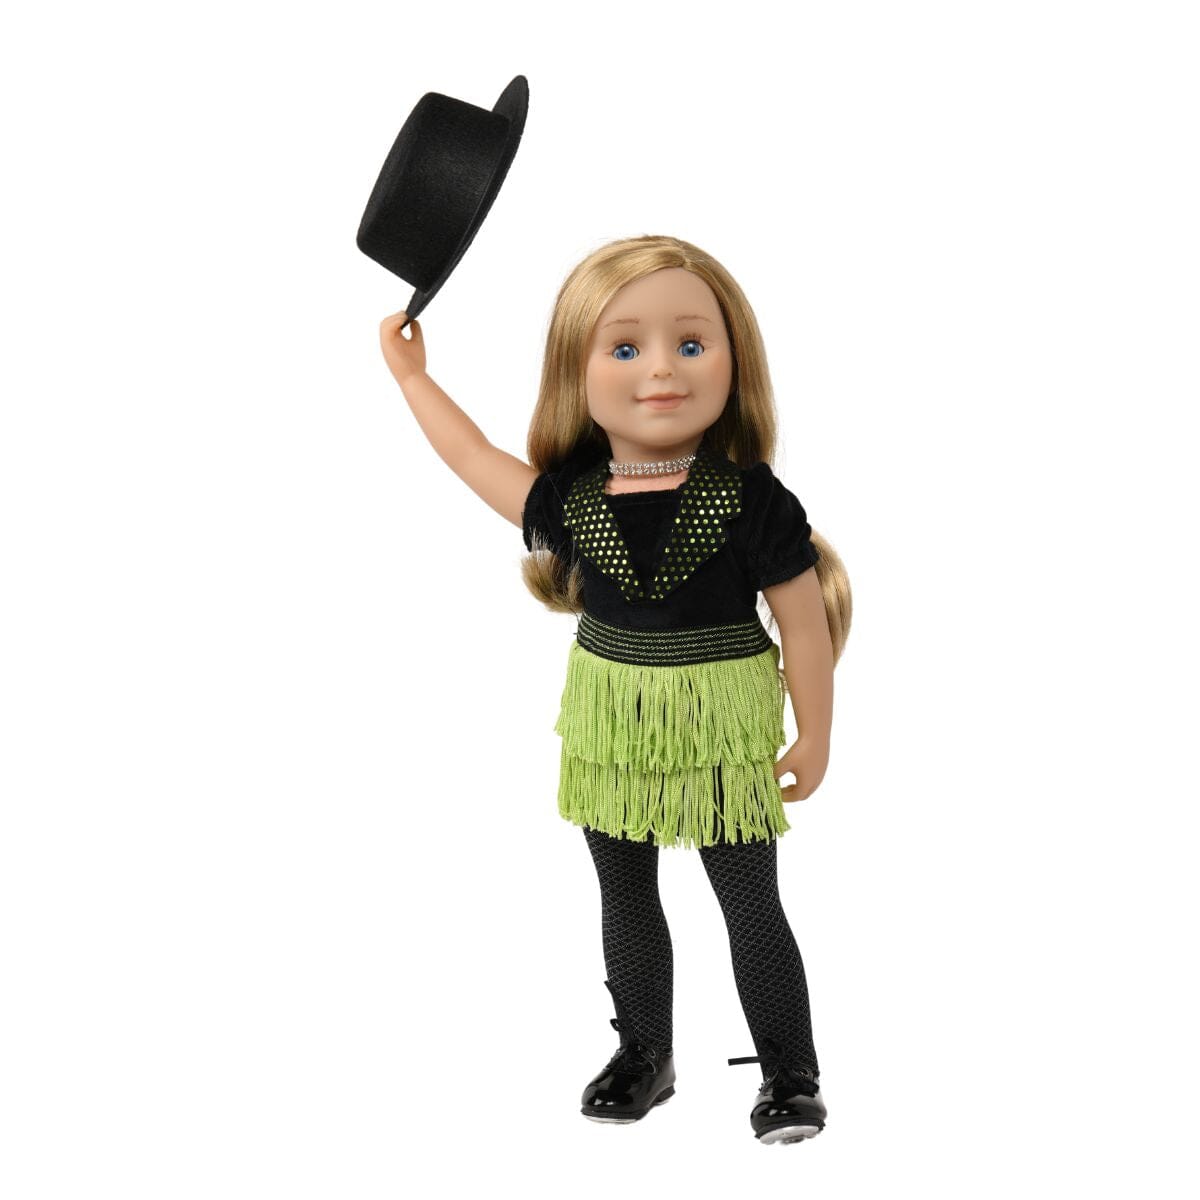 blonde doll wearing tap dance outfit with tap shoes